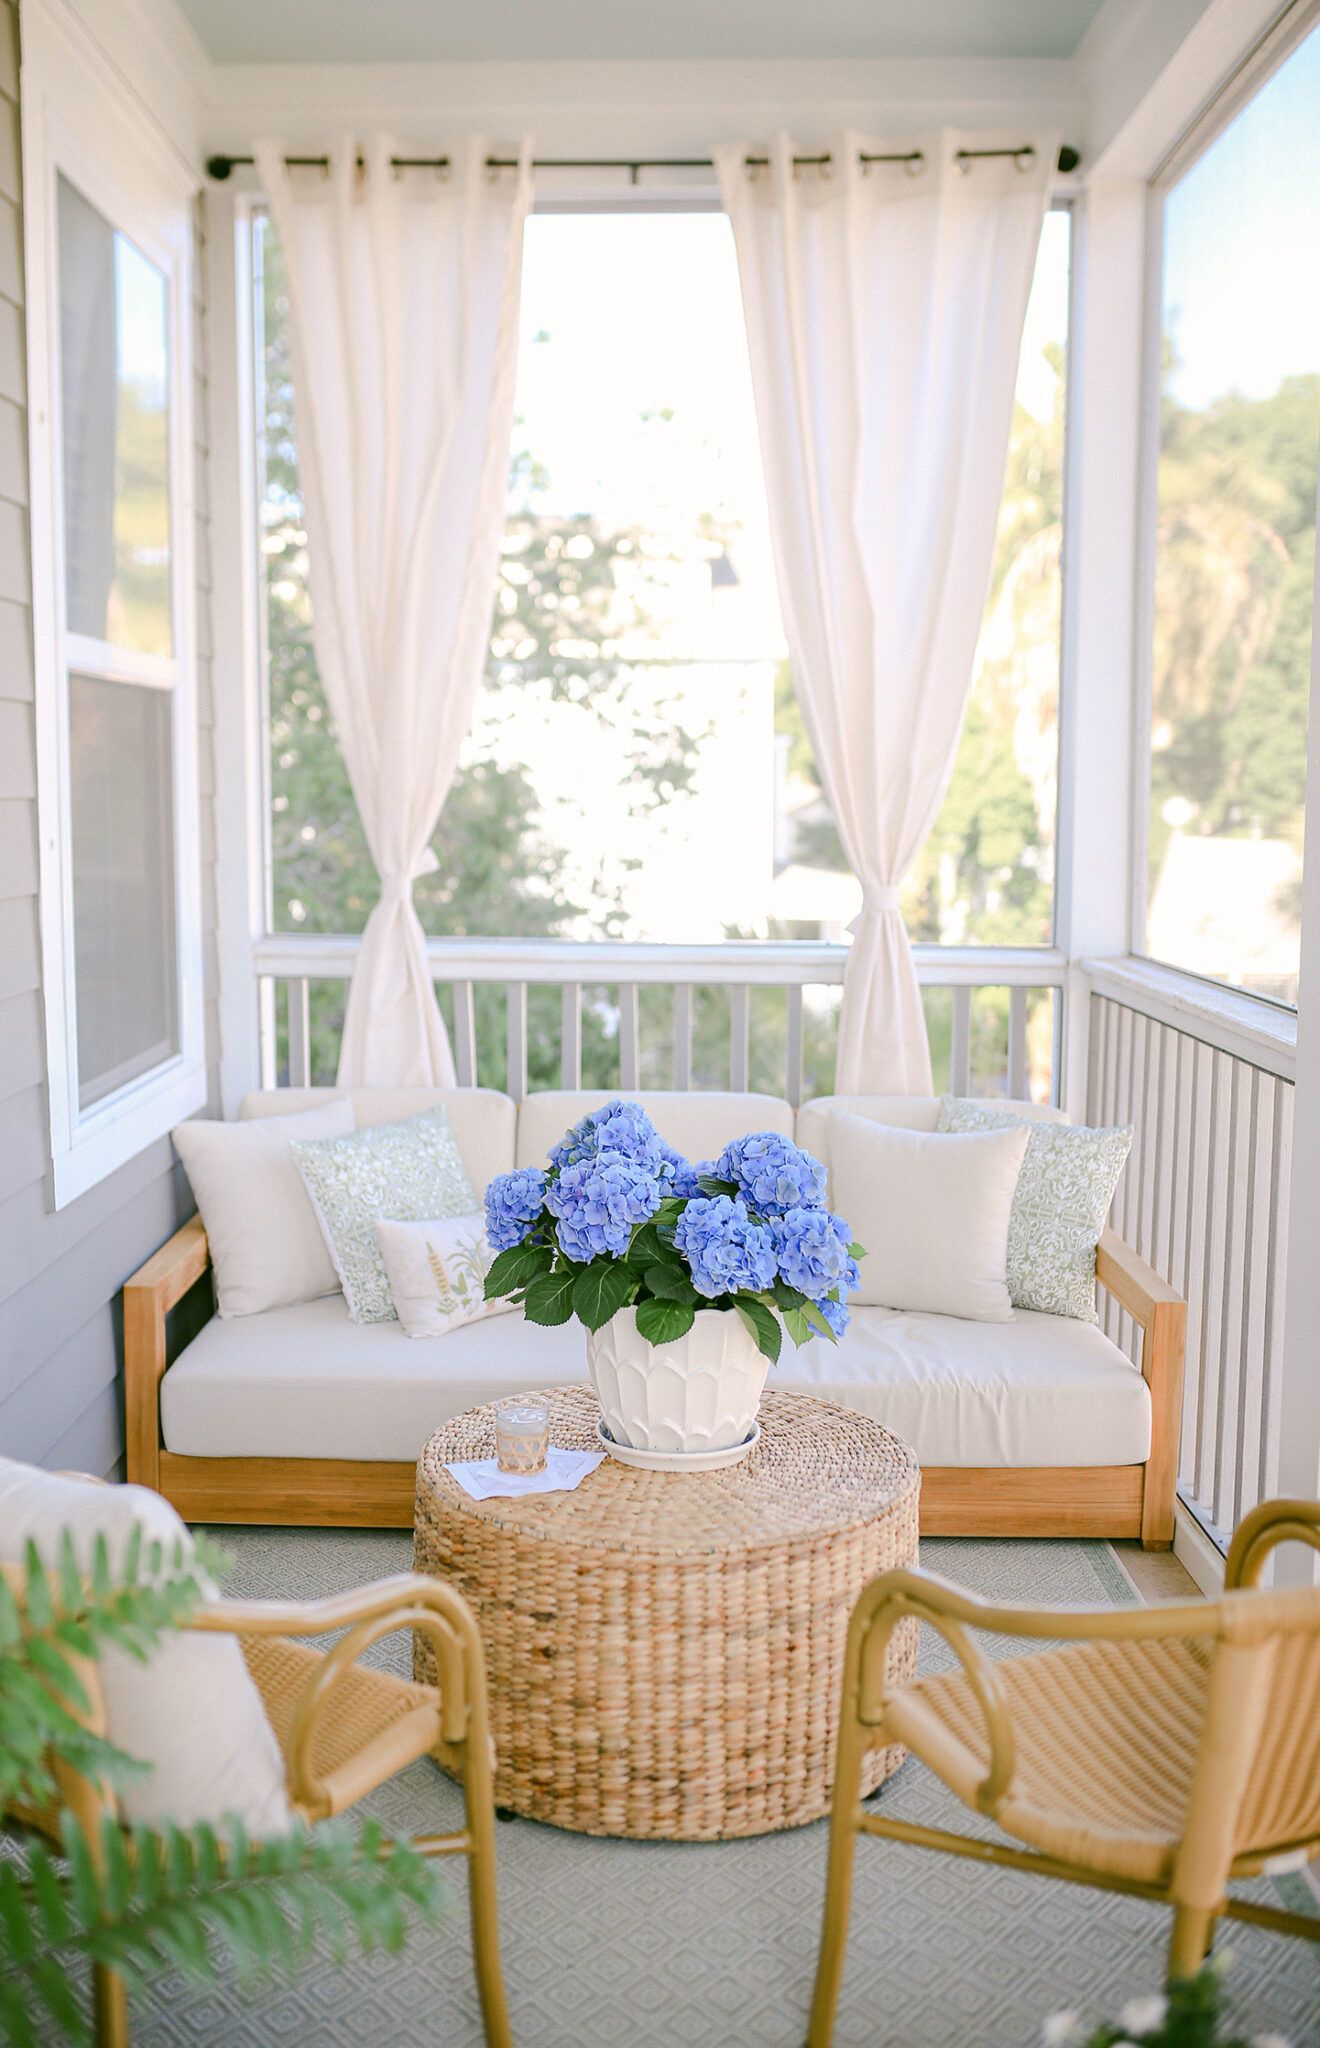 Tips for Creating a Cozy Screened-In Porch